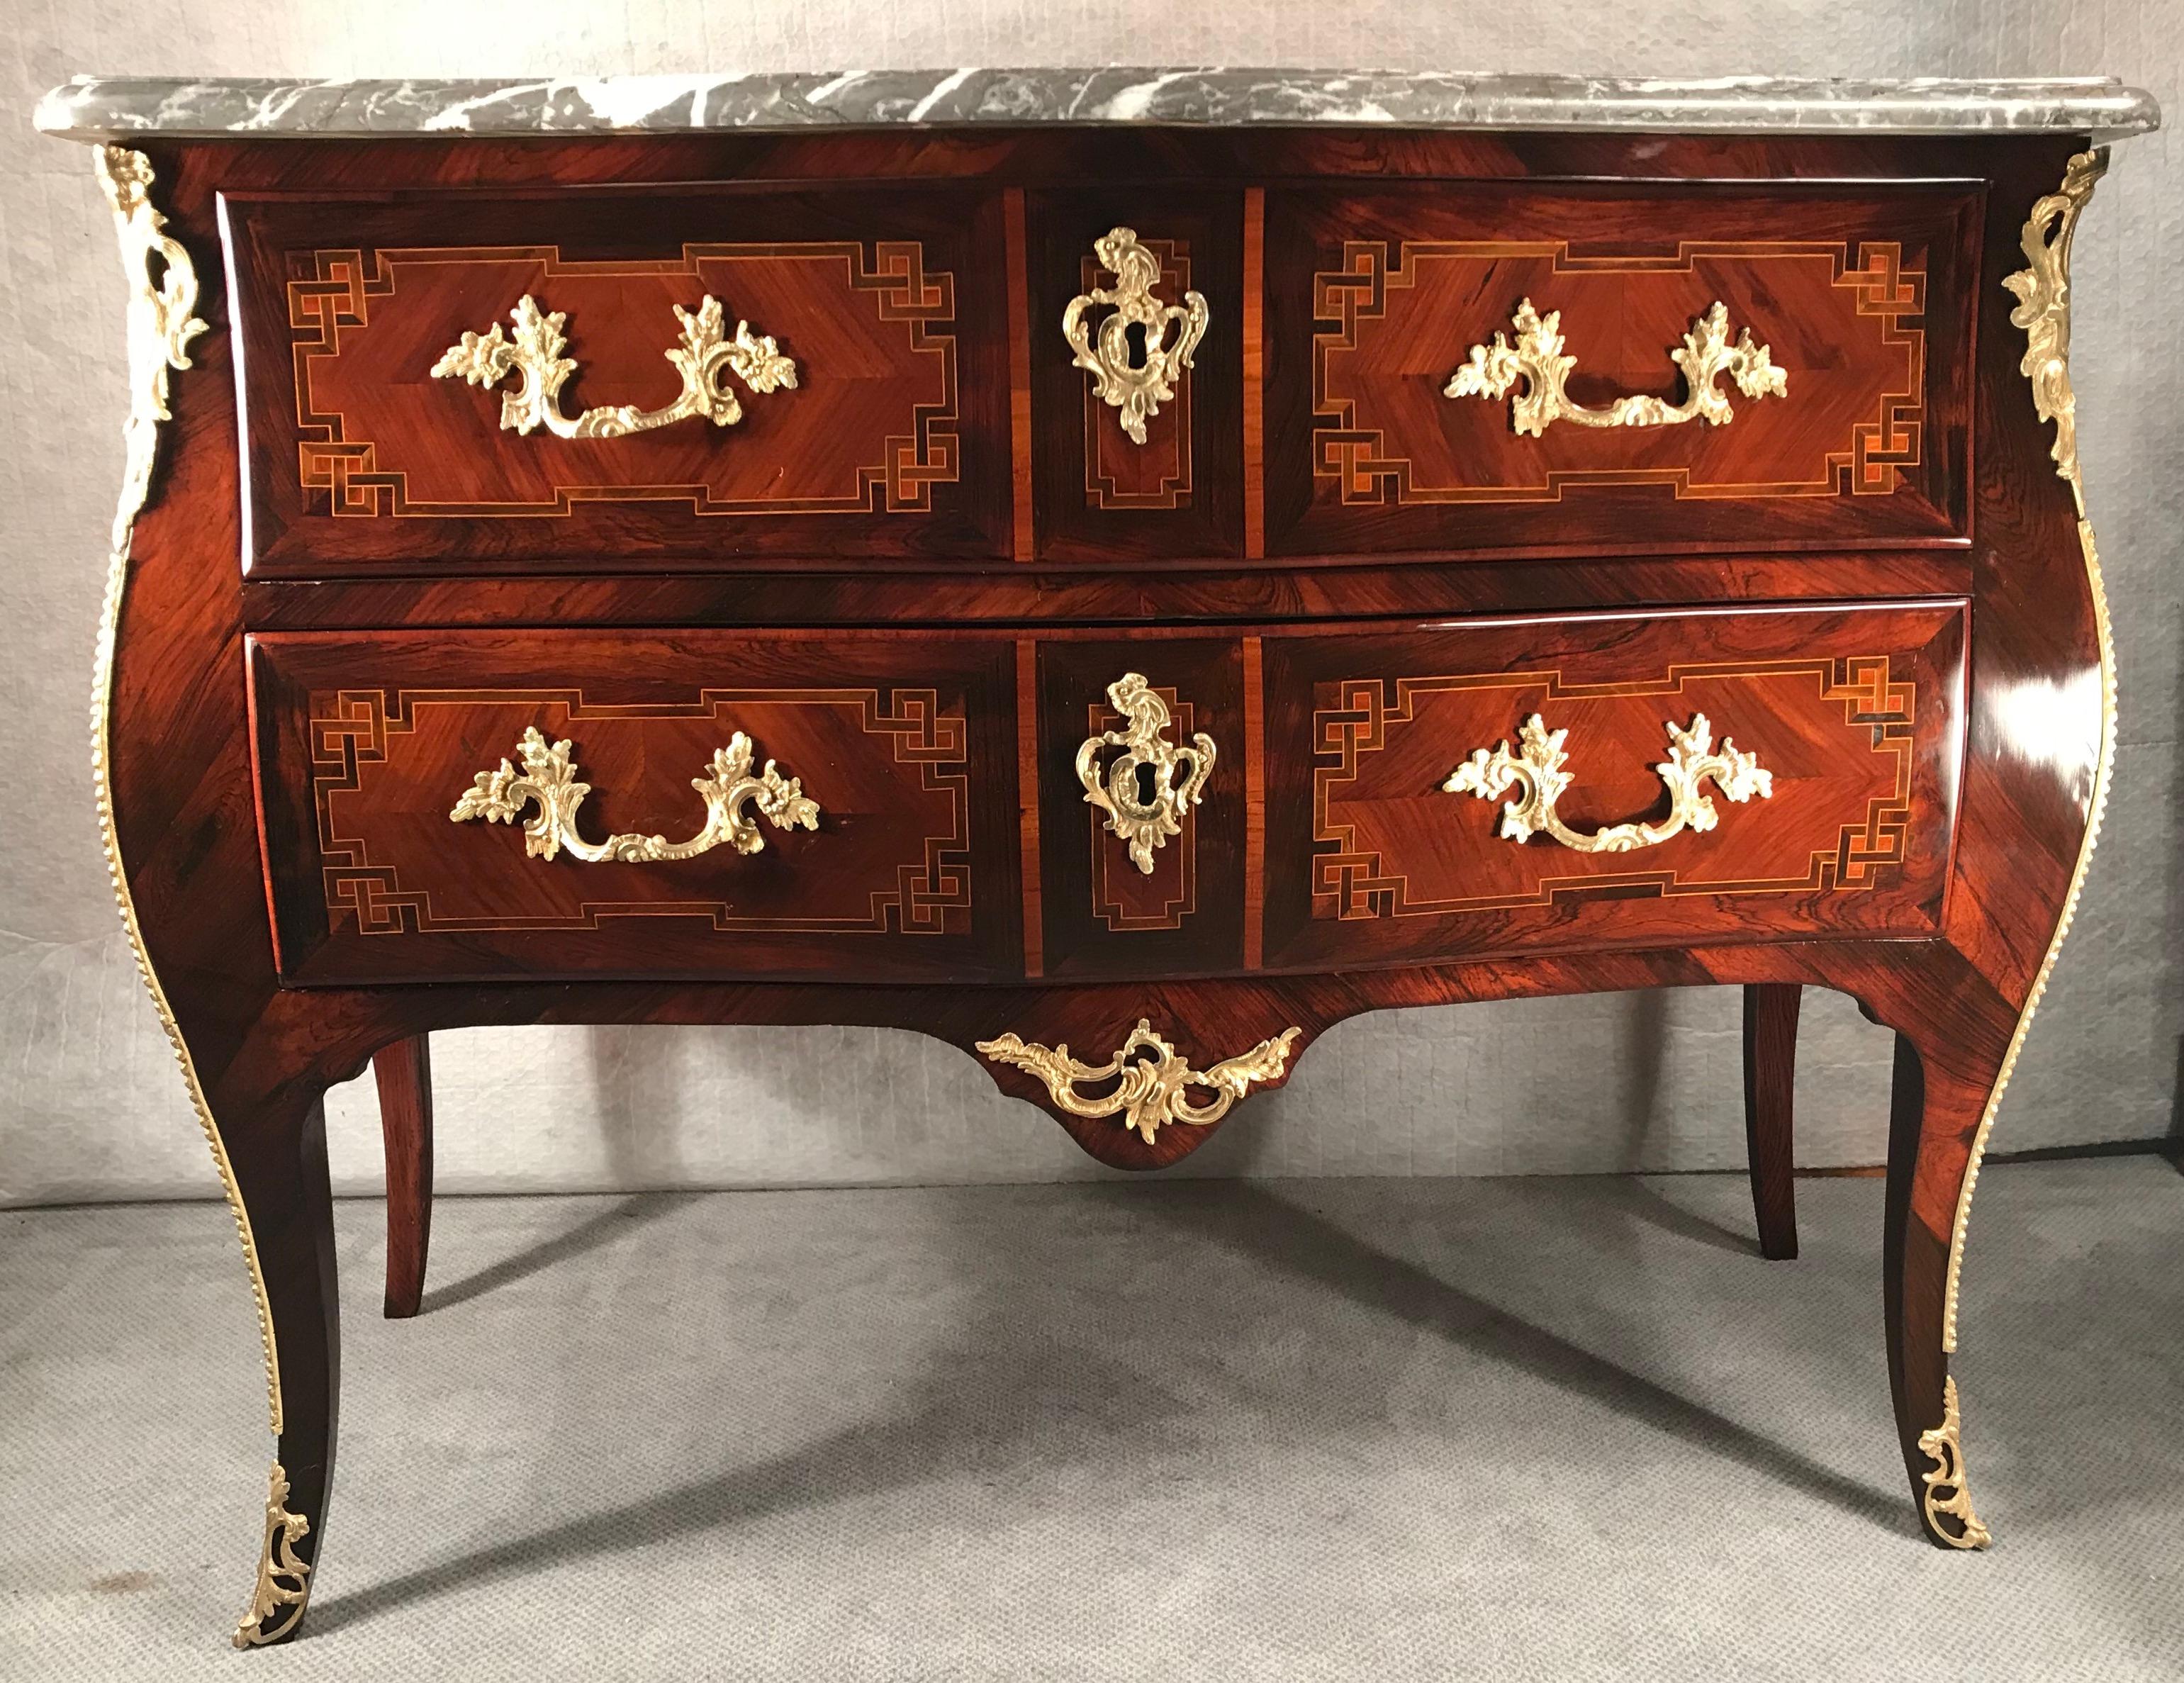 Louis XV dresser, France 1770.
This unique dresser was made in the period between Louis XV and Louis XVI. 
It still has the graceful curves and the richly decorated bronze fittings of the Rococo style, but the marquetry pattern already starts